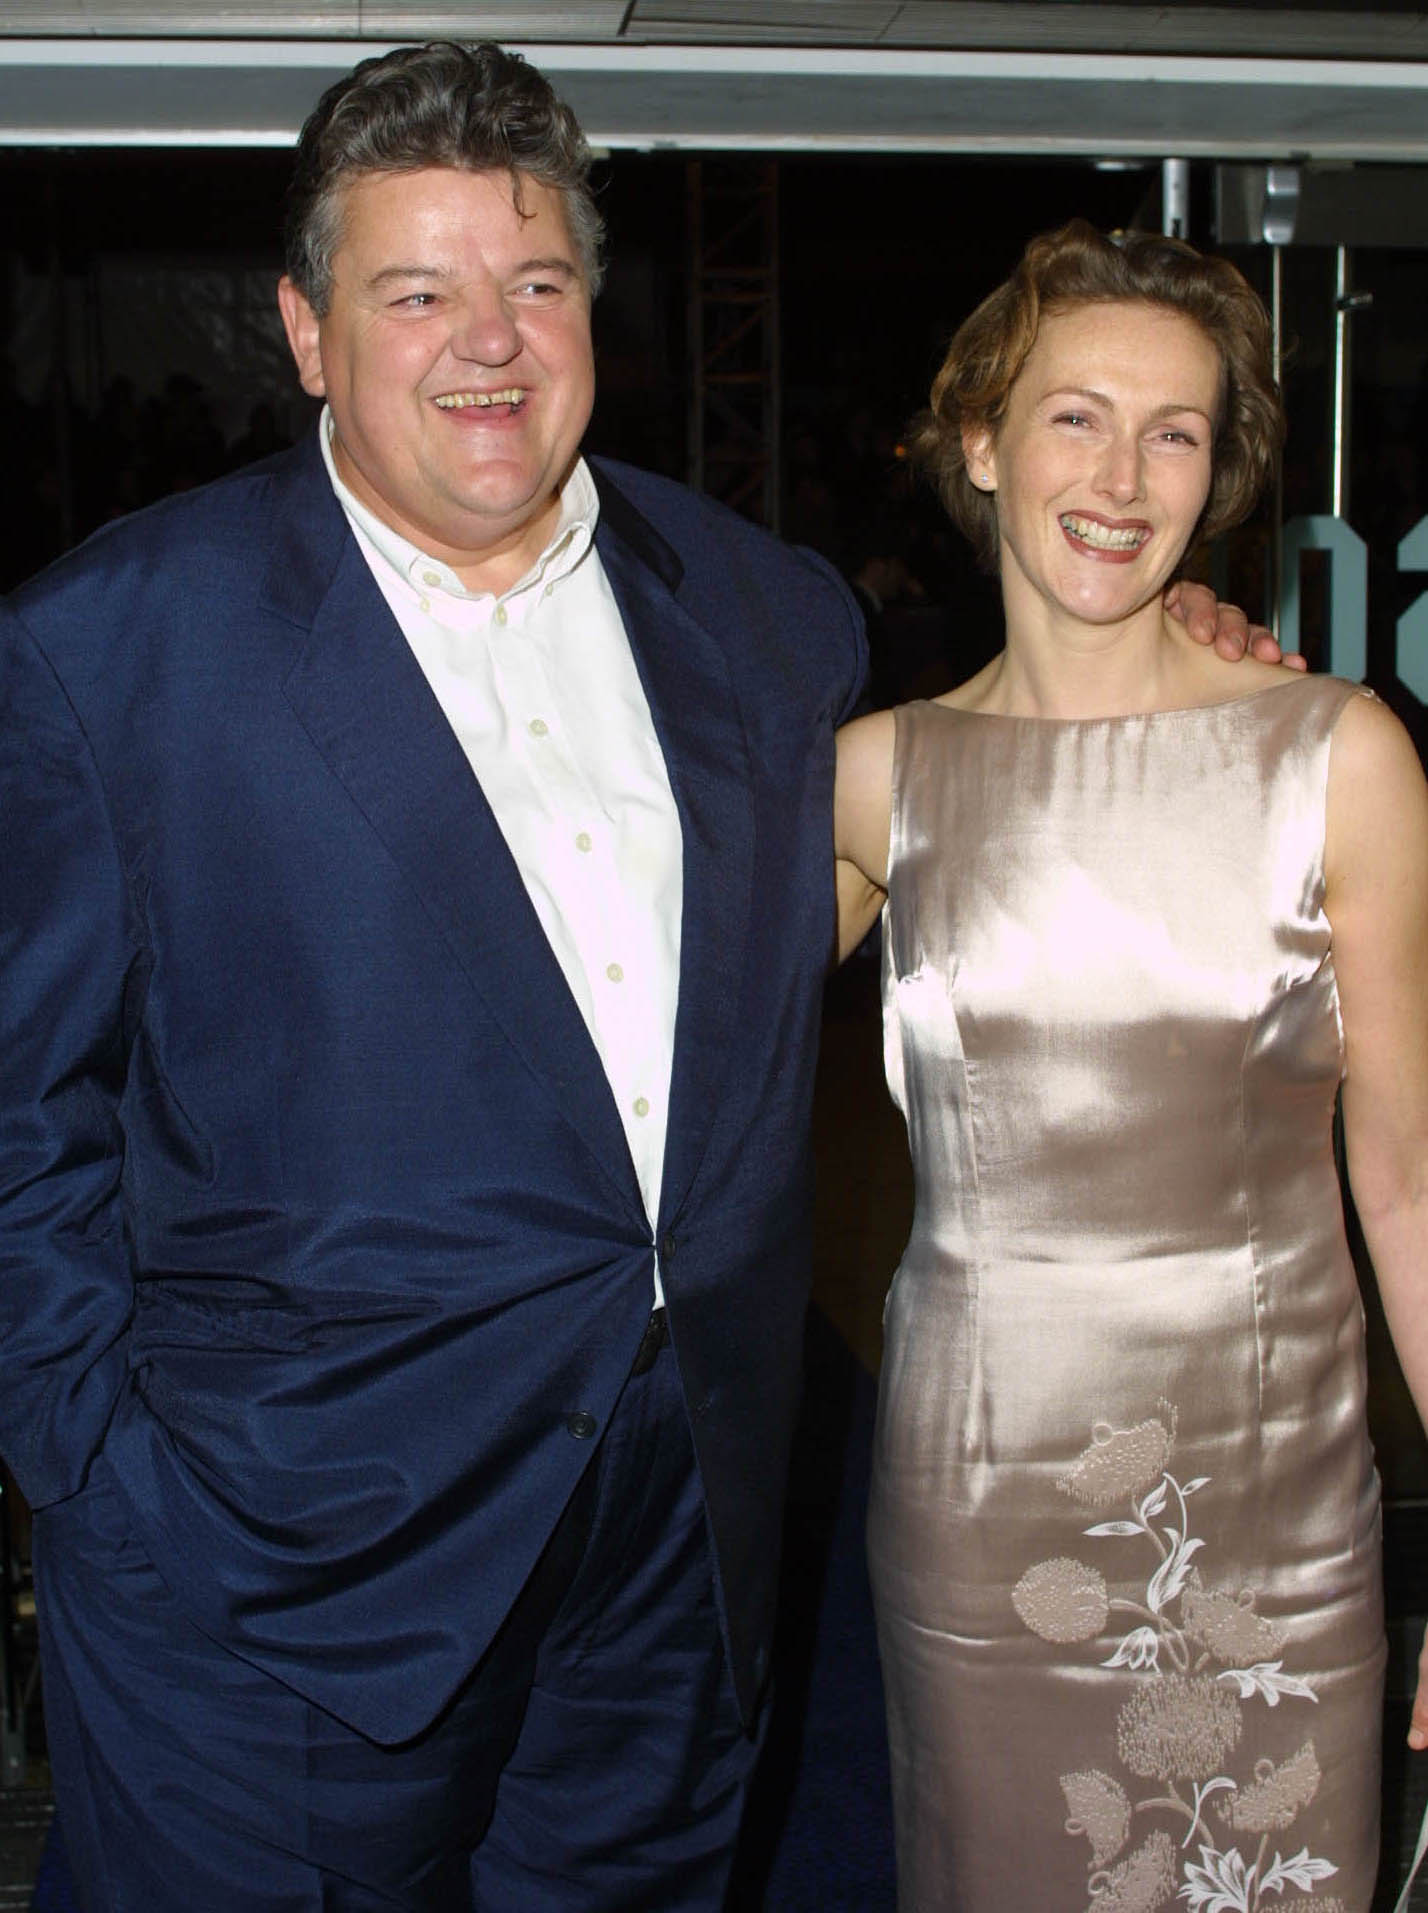 Robbie Coltrane and Rhona Gemmell are pictured at the world premiere of "Harry Potter and the Sorcerer's Stone" in London | Source: Getty Images